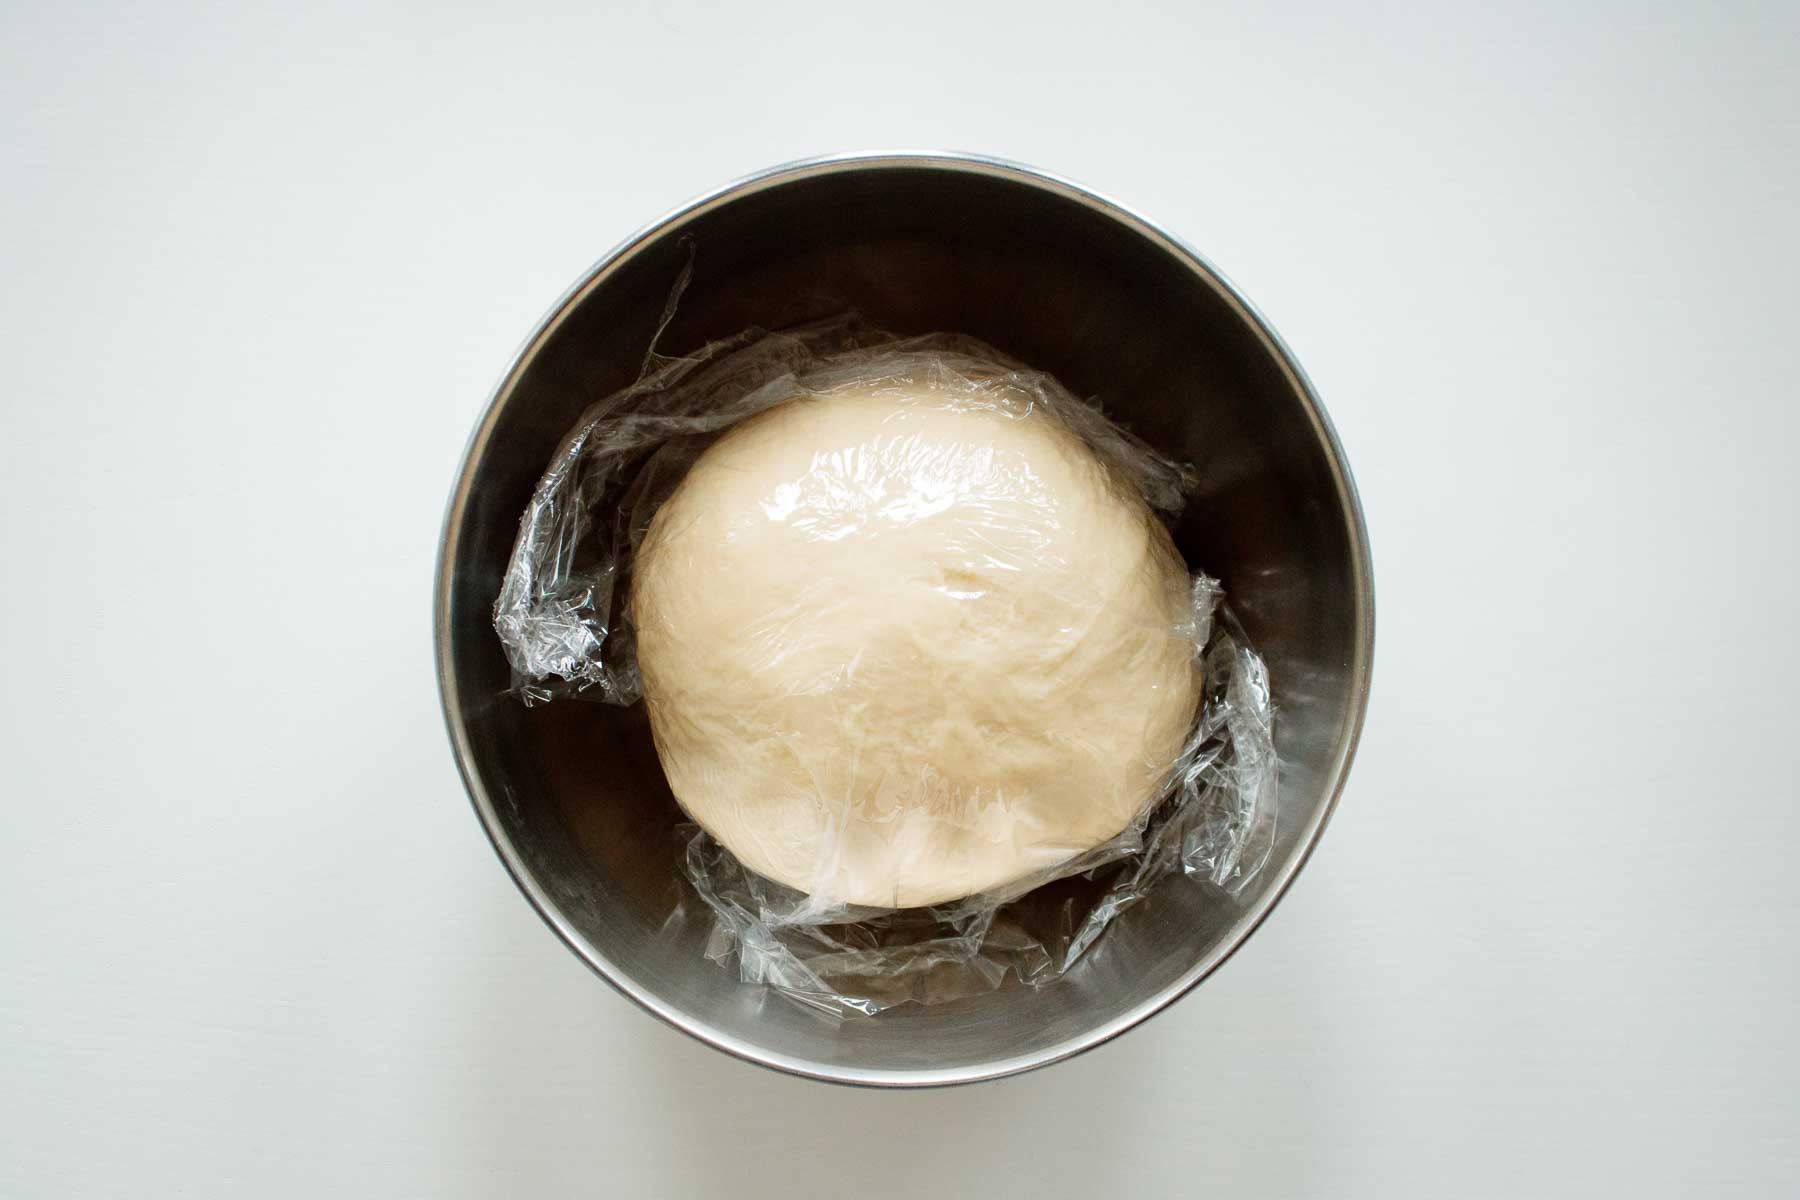 Covered dough, start of the first rise.